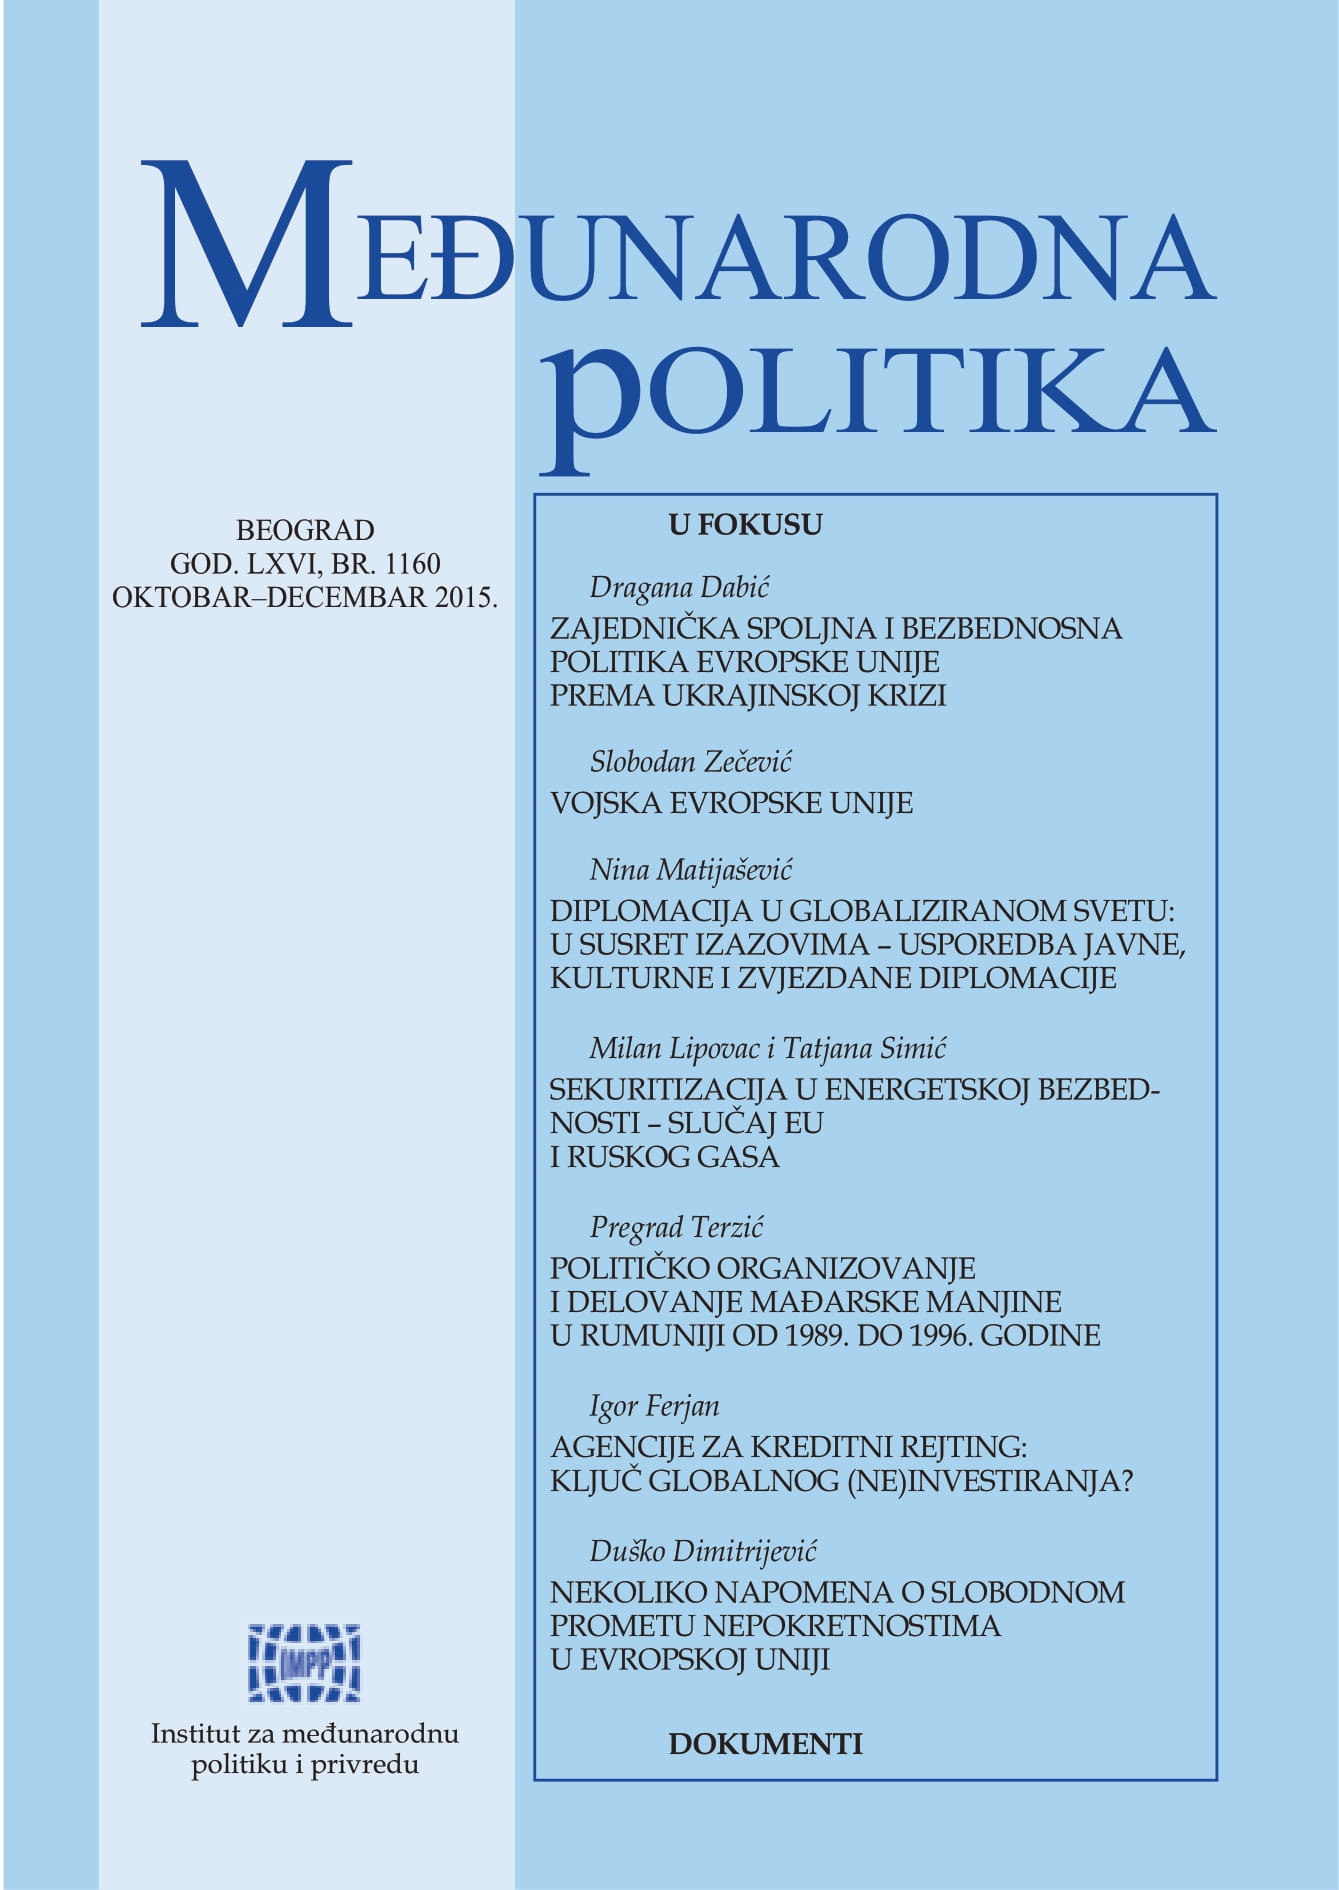 The Political Organization and Activity of the Hungarian Minority in Romania from 1989 to 1996 Cover Image